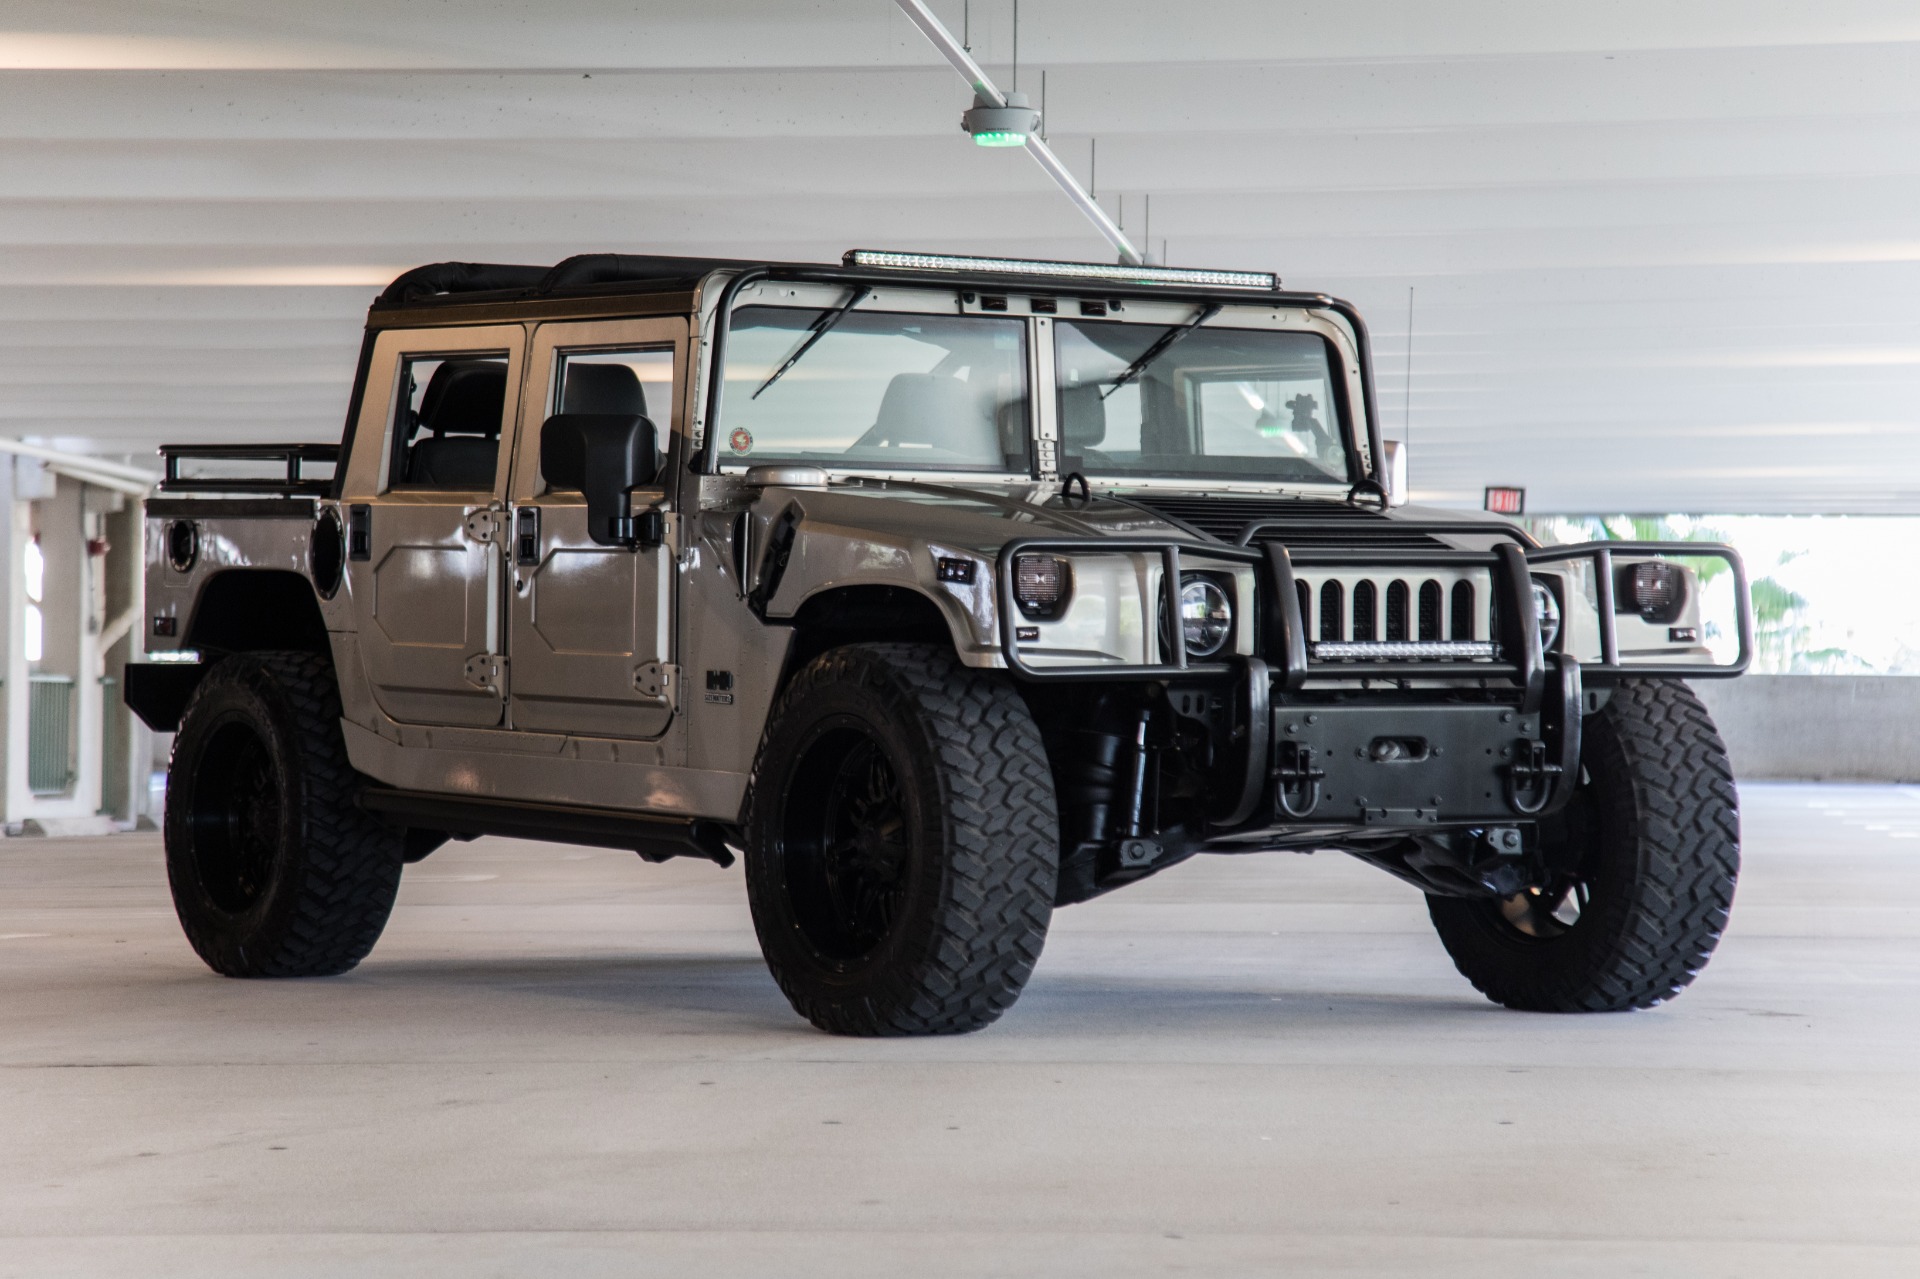 Used 2003 HUMMER H1 Open Top For Sale ($109,900) Marino Motors Stock #204085